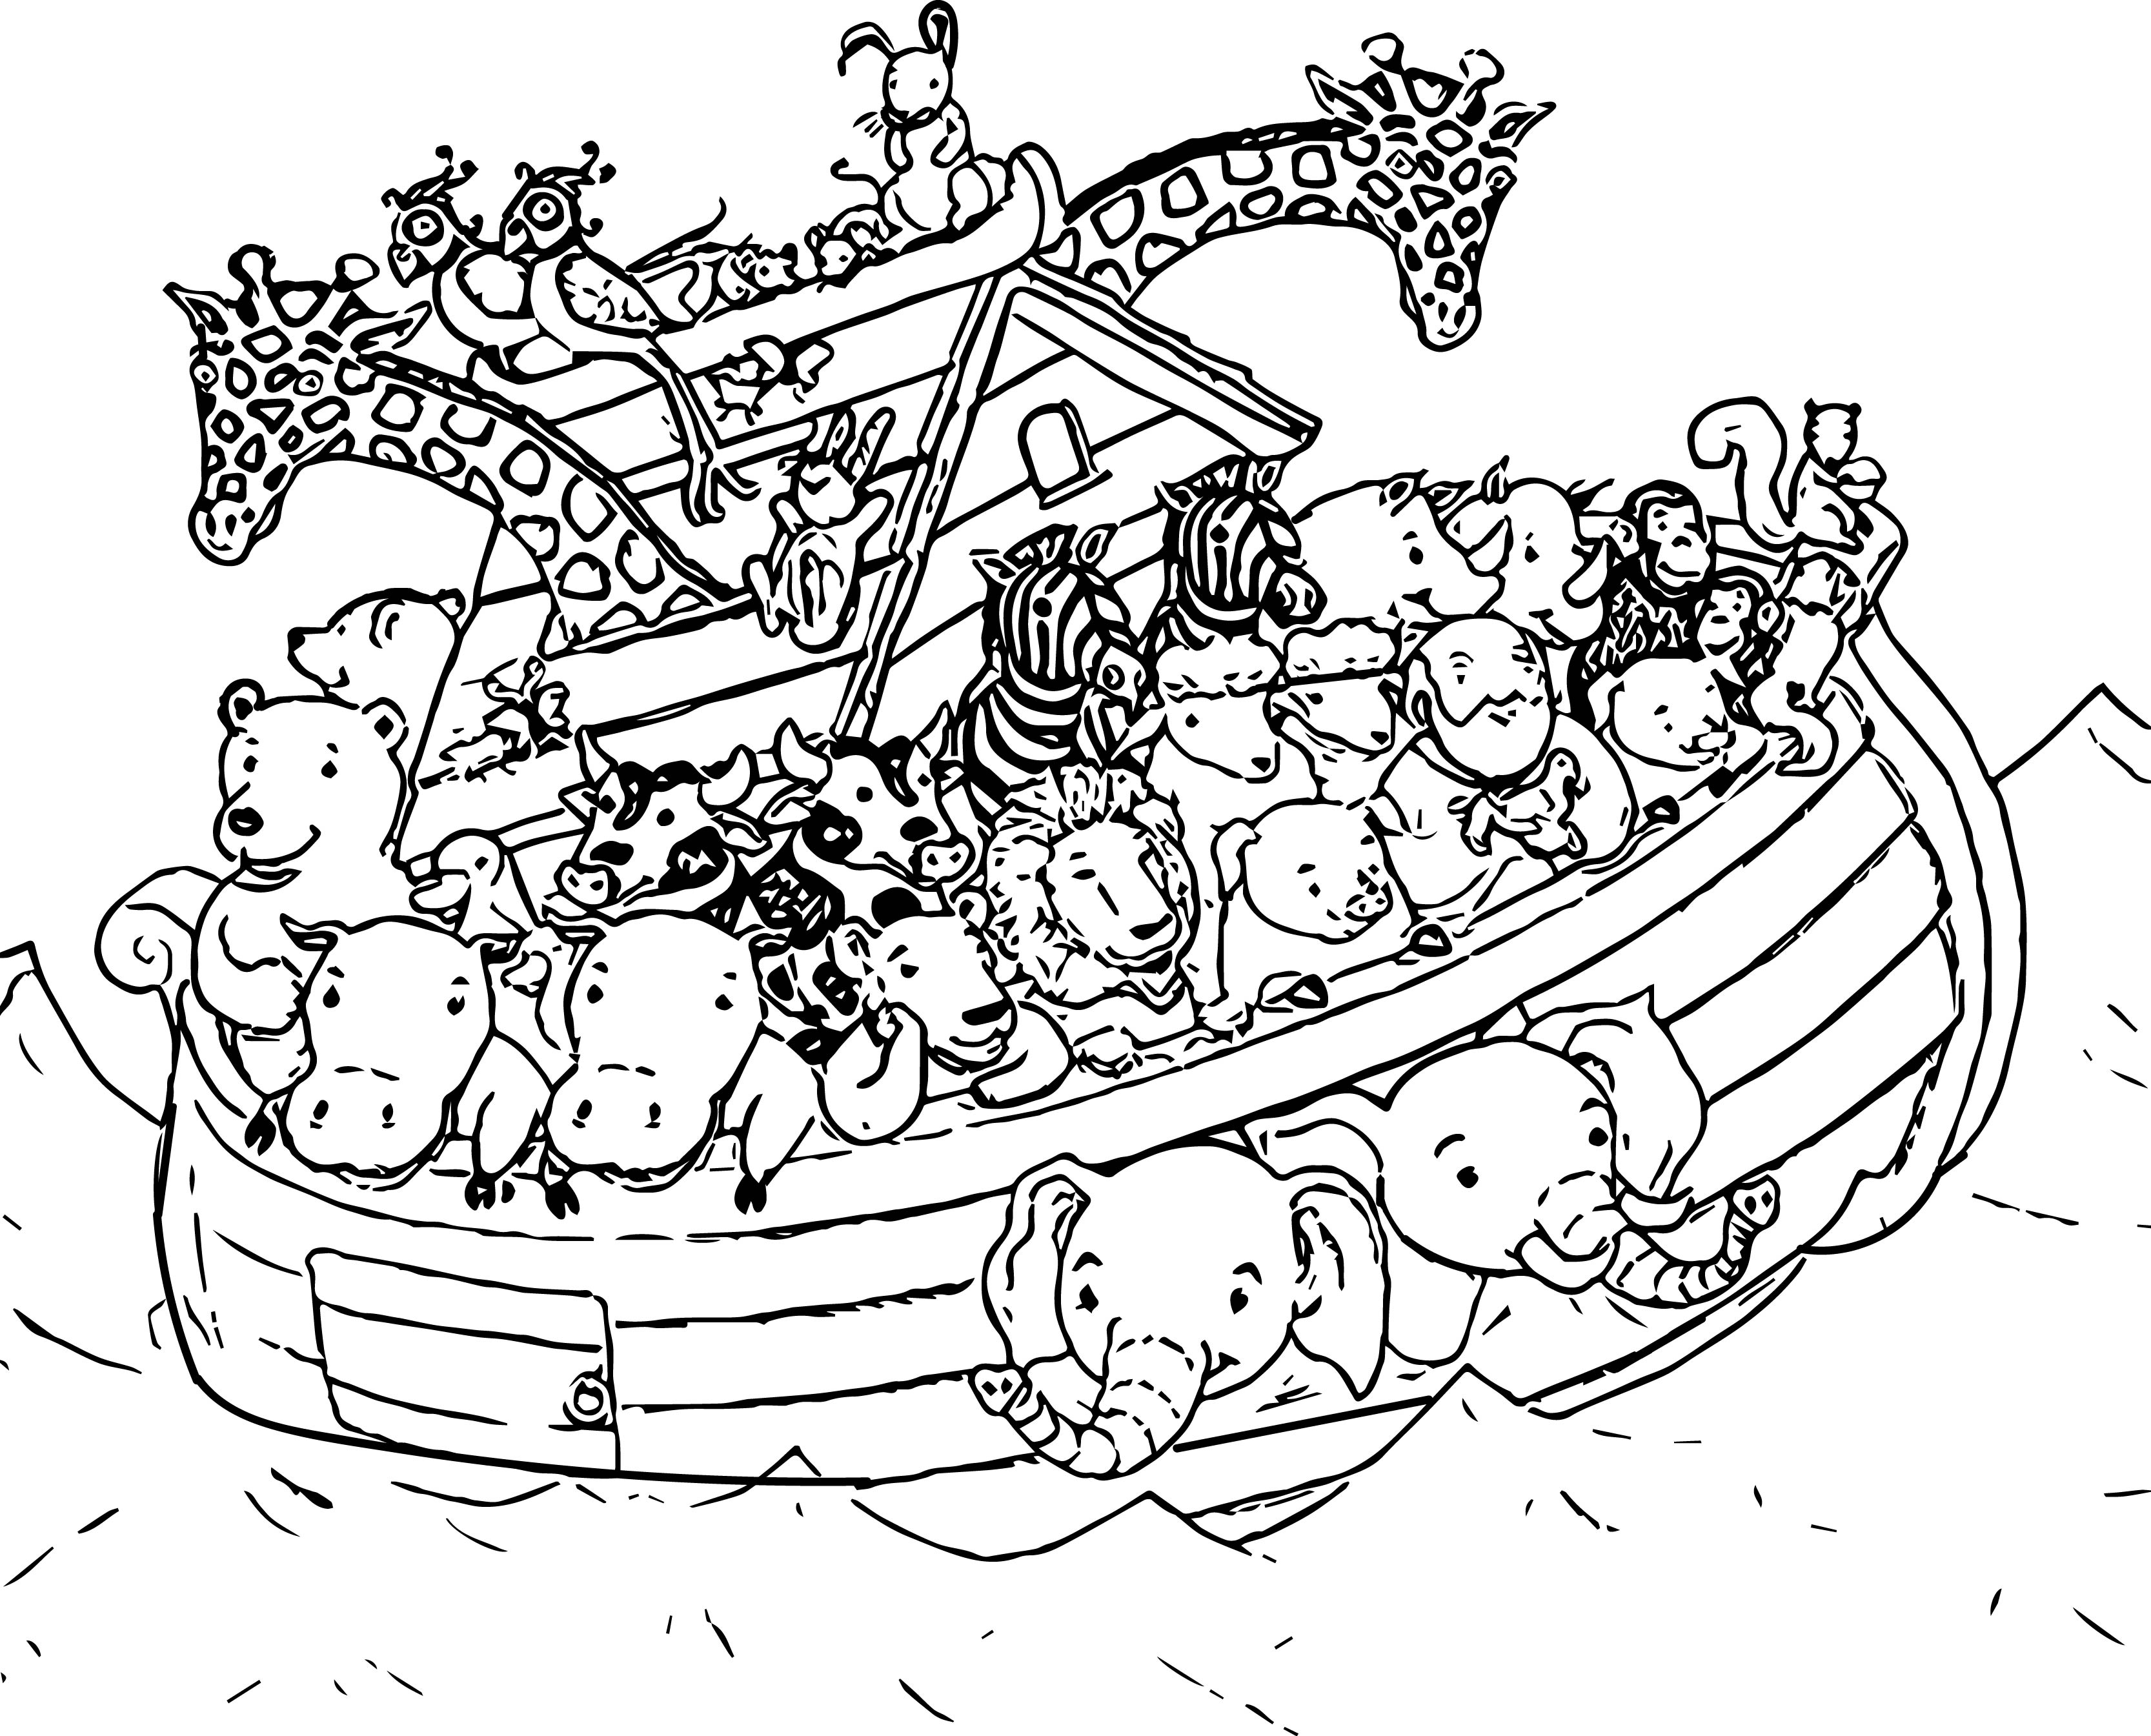 Printable Noahs Ark Coloring Pages at GetColorings.com ...